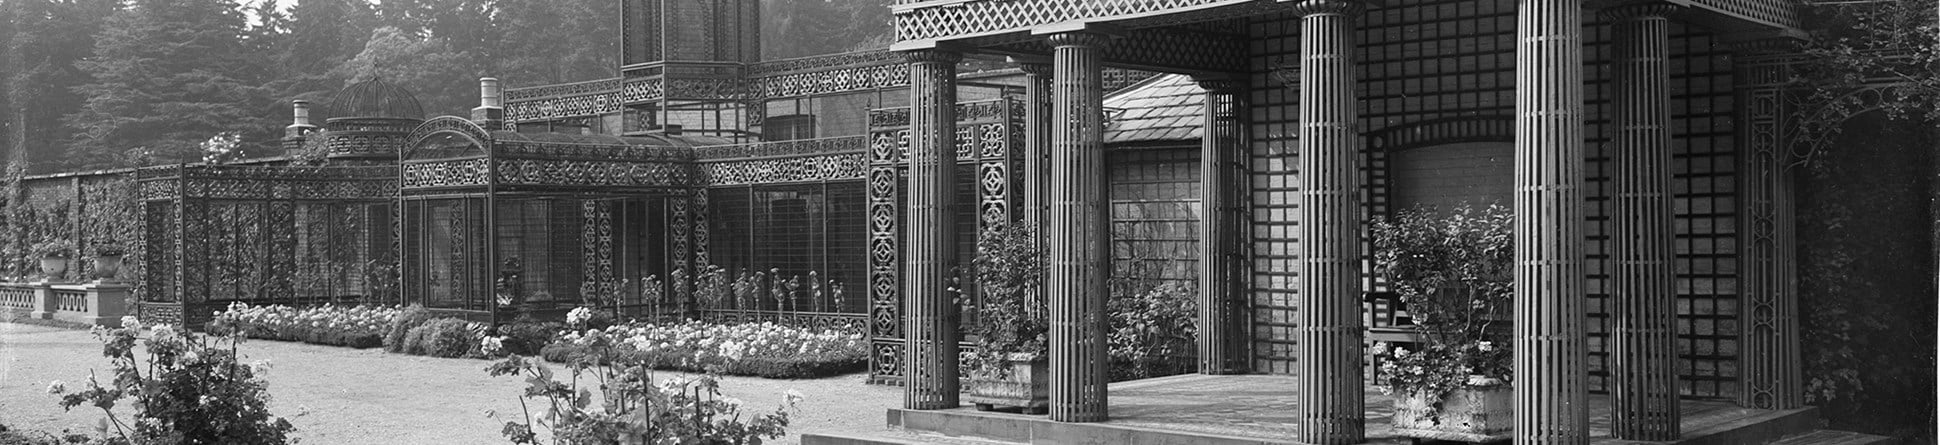 archive black and white photograph of a classical style colonnaded garden building and an elaborate wrought-iron aviary